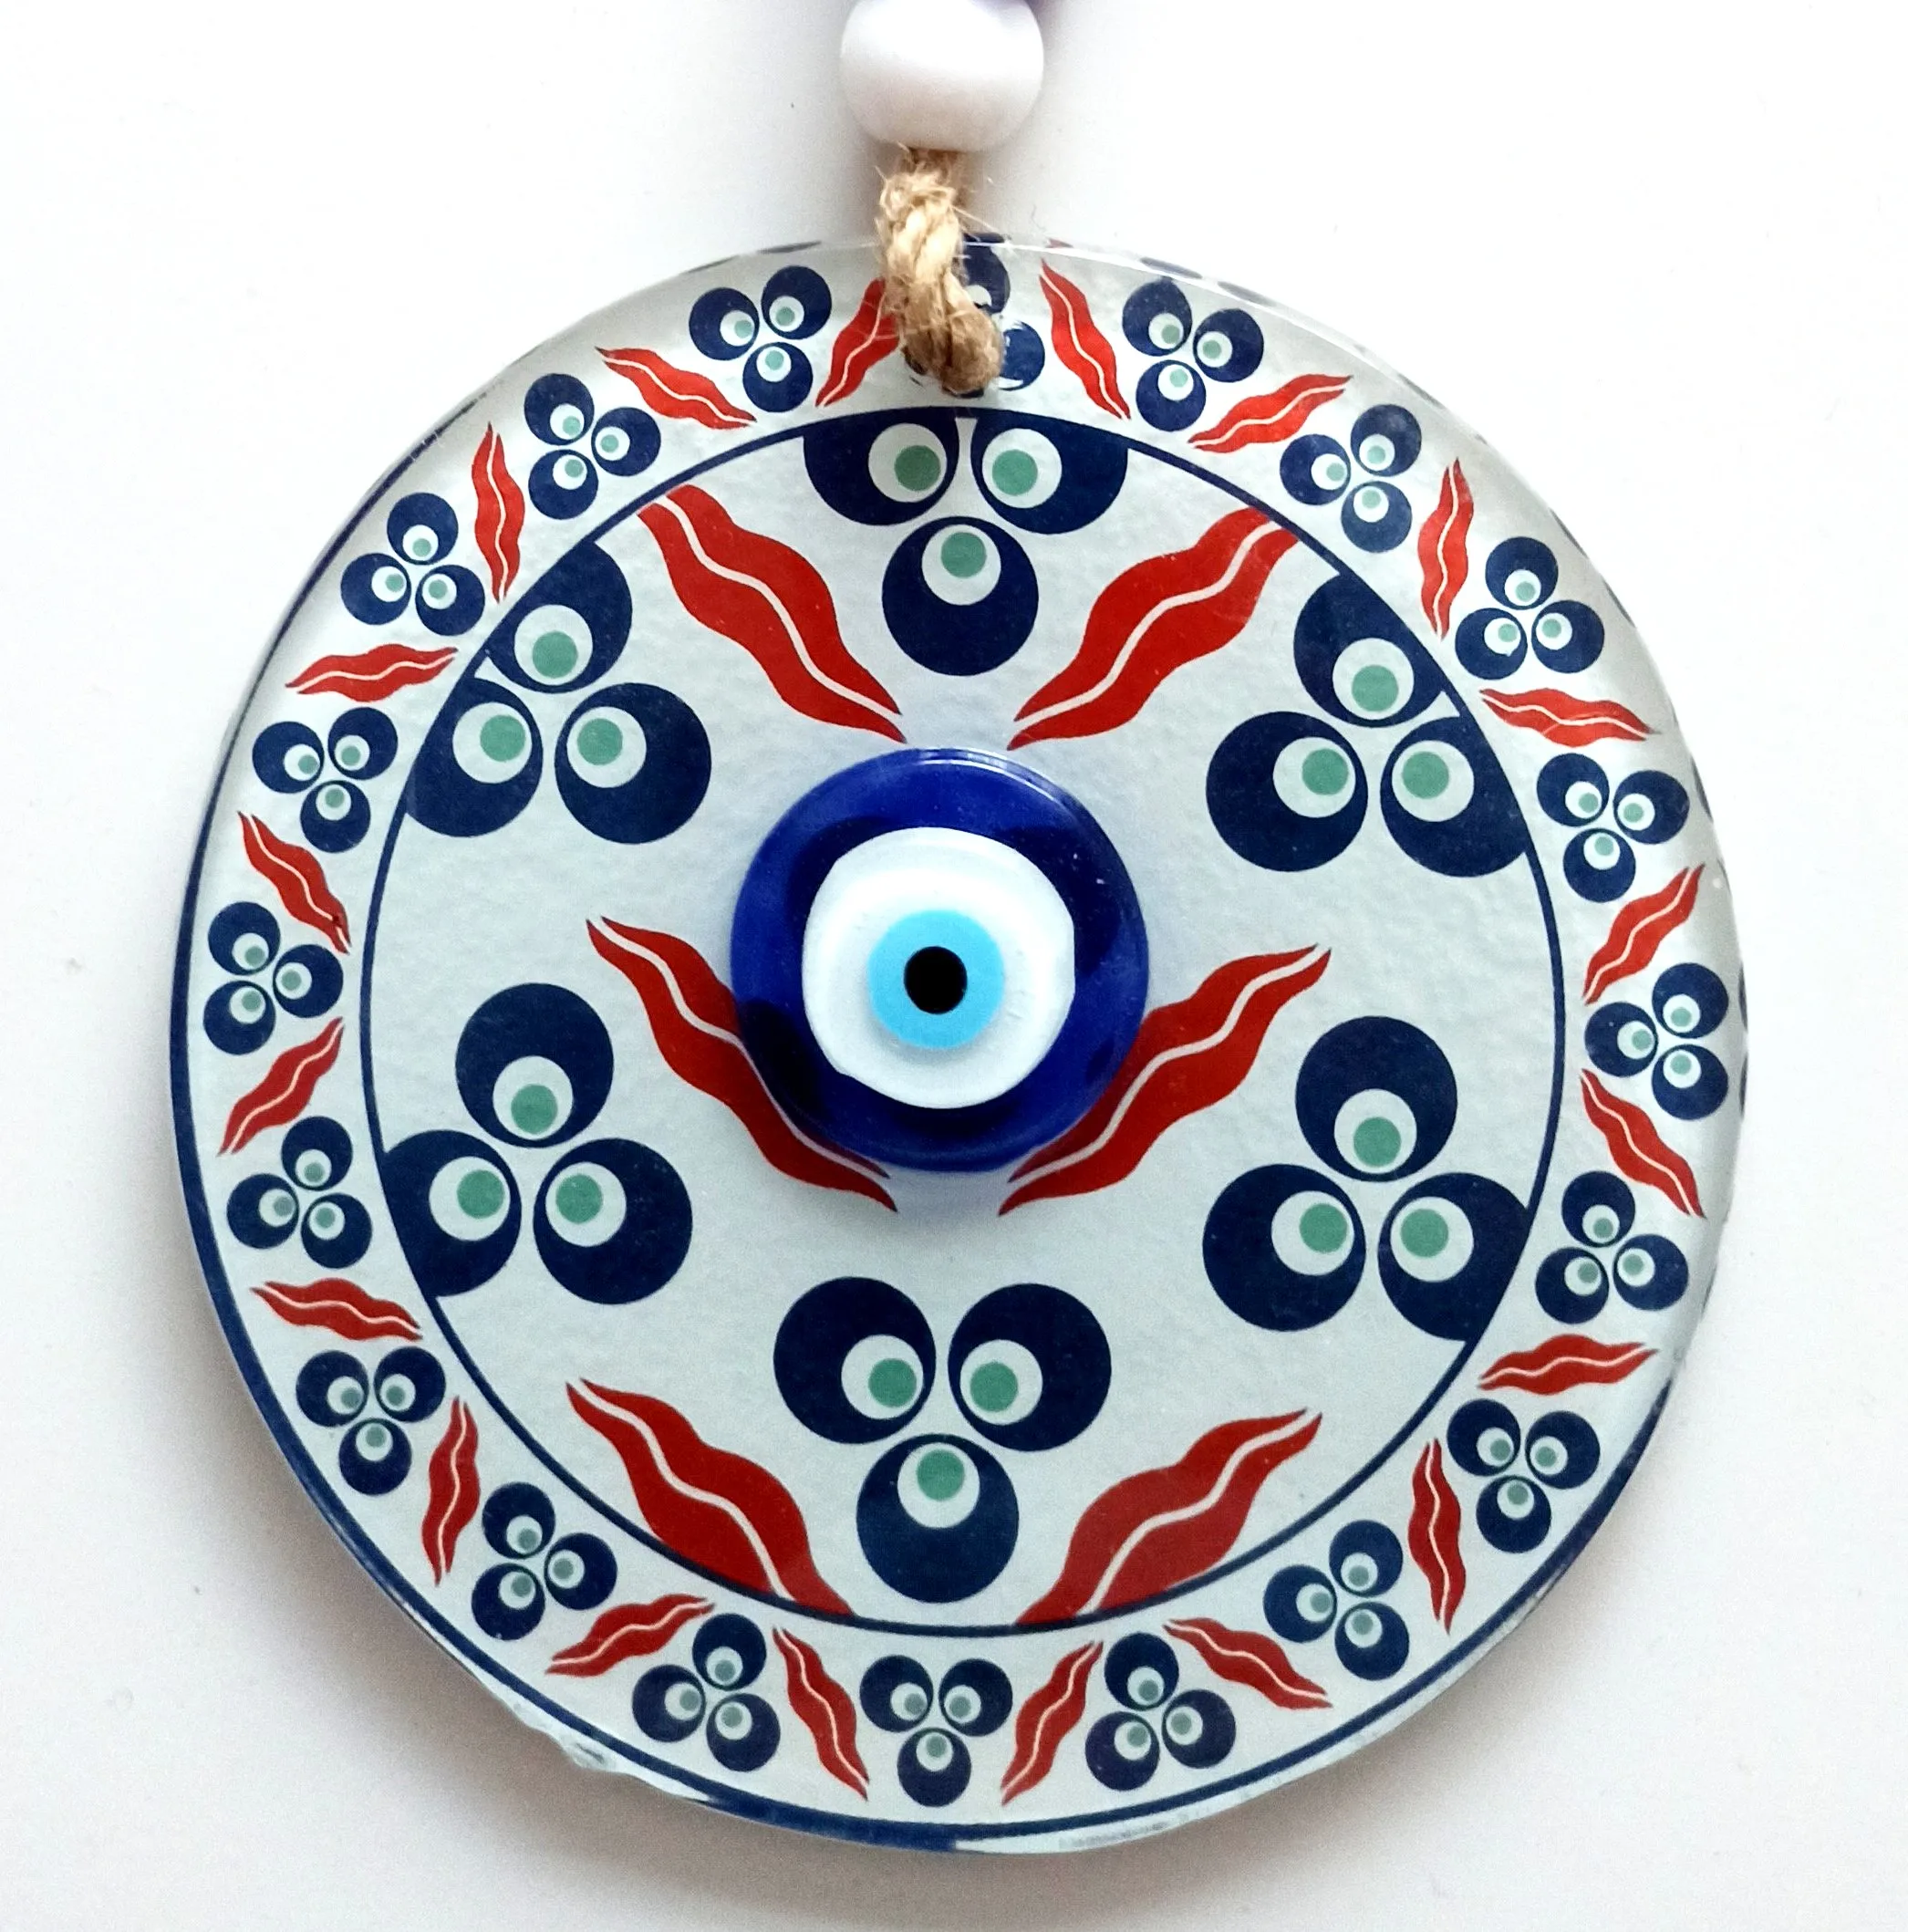 

Three Drop Patterned Evil Eye Beads Fusion Glass Wall Ornament